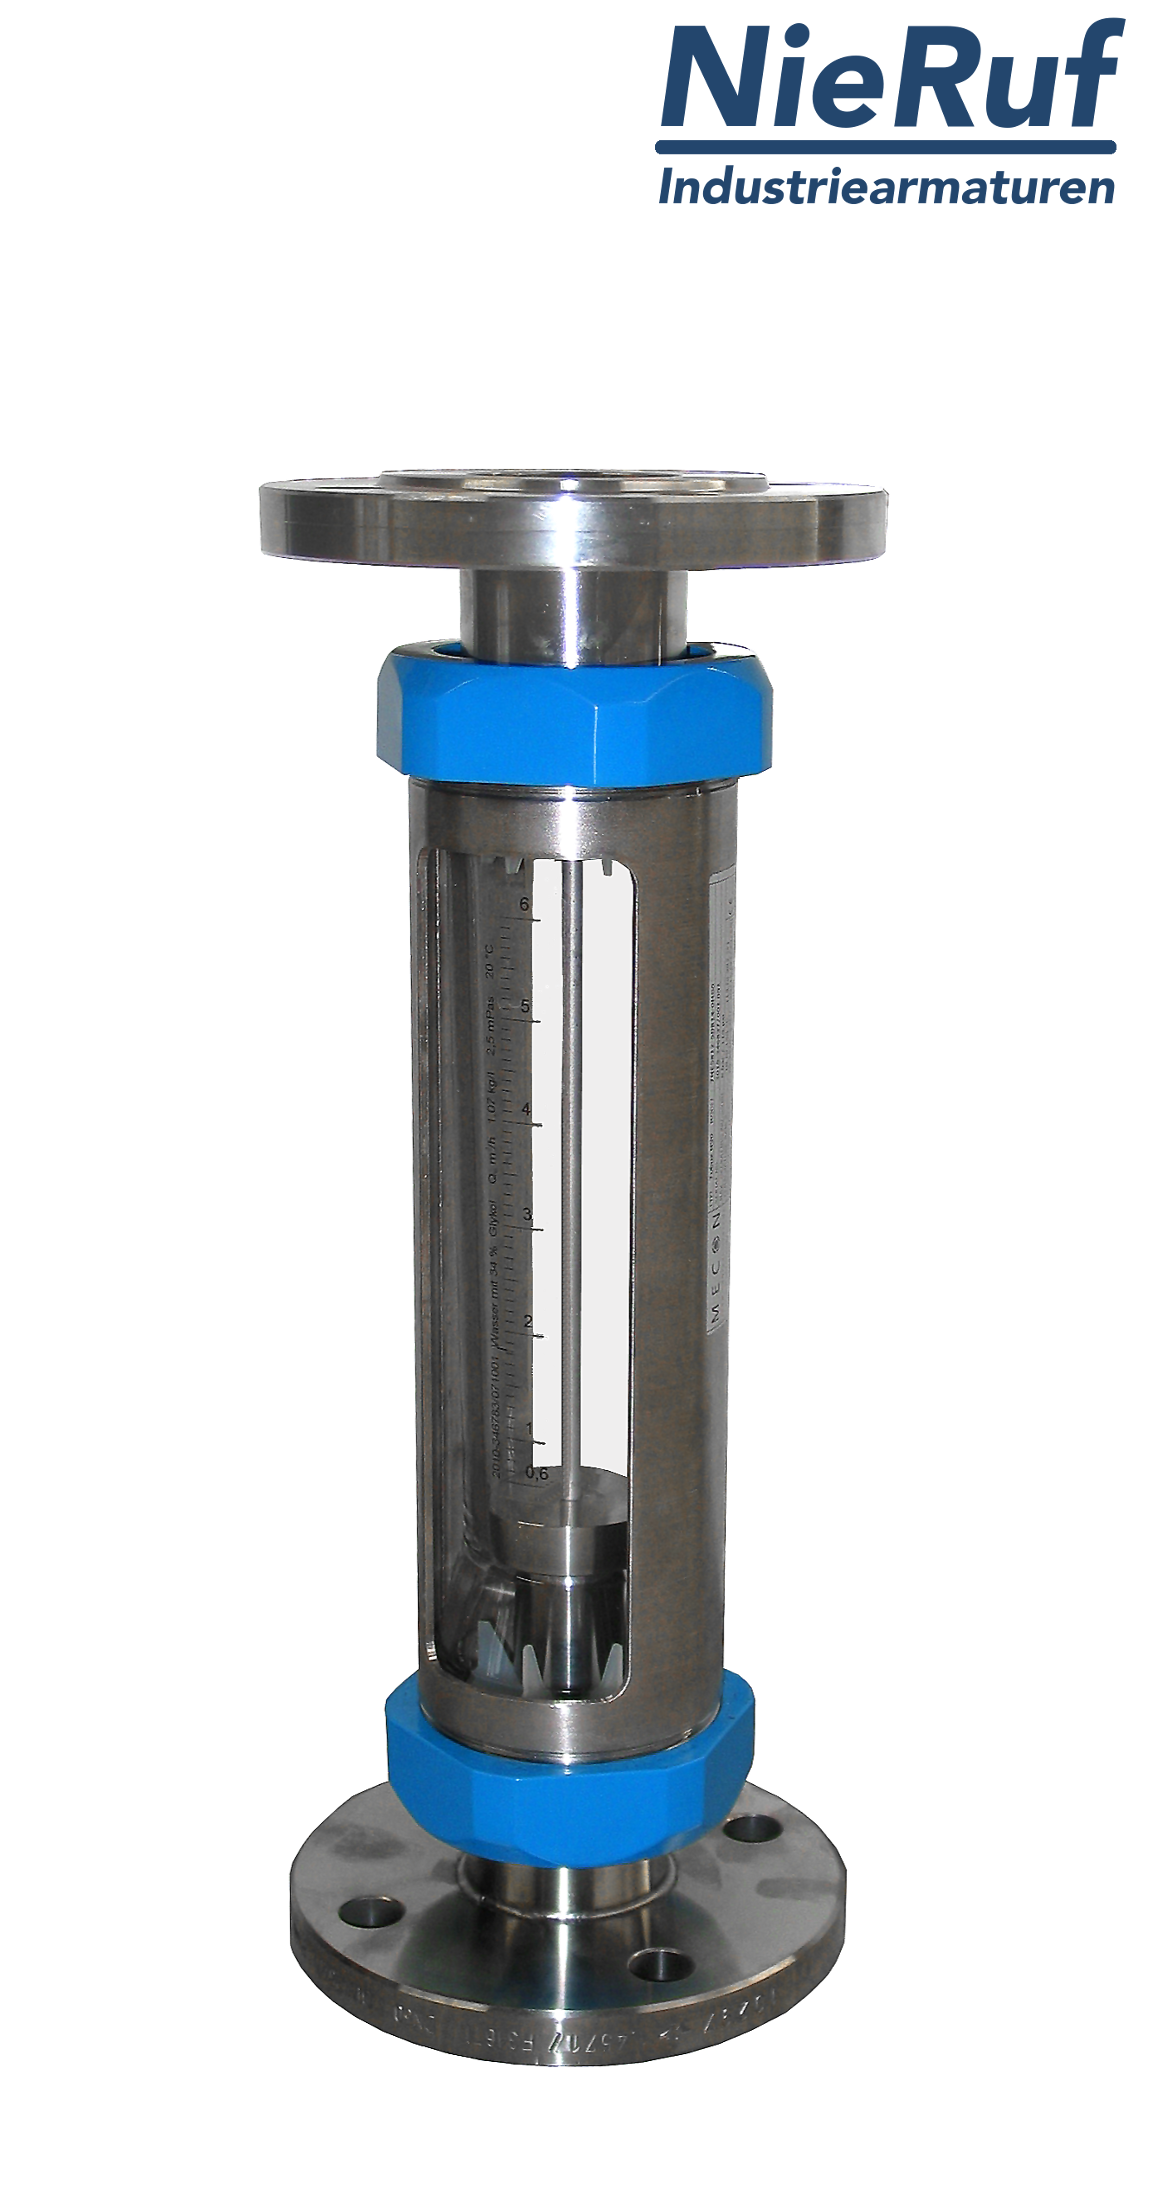 Variable area flowmeter stainless steel + borosilicate flange DN65 500.0 - 5000 l/h water FKM